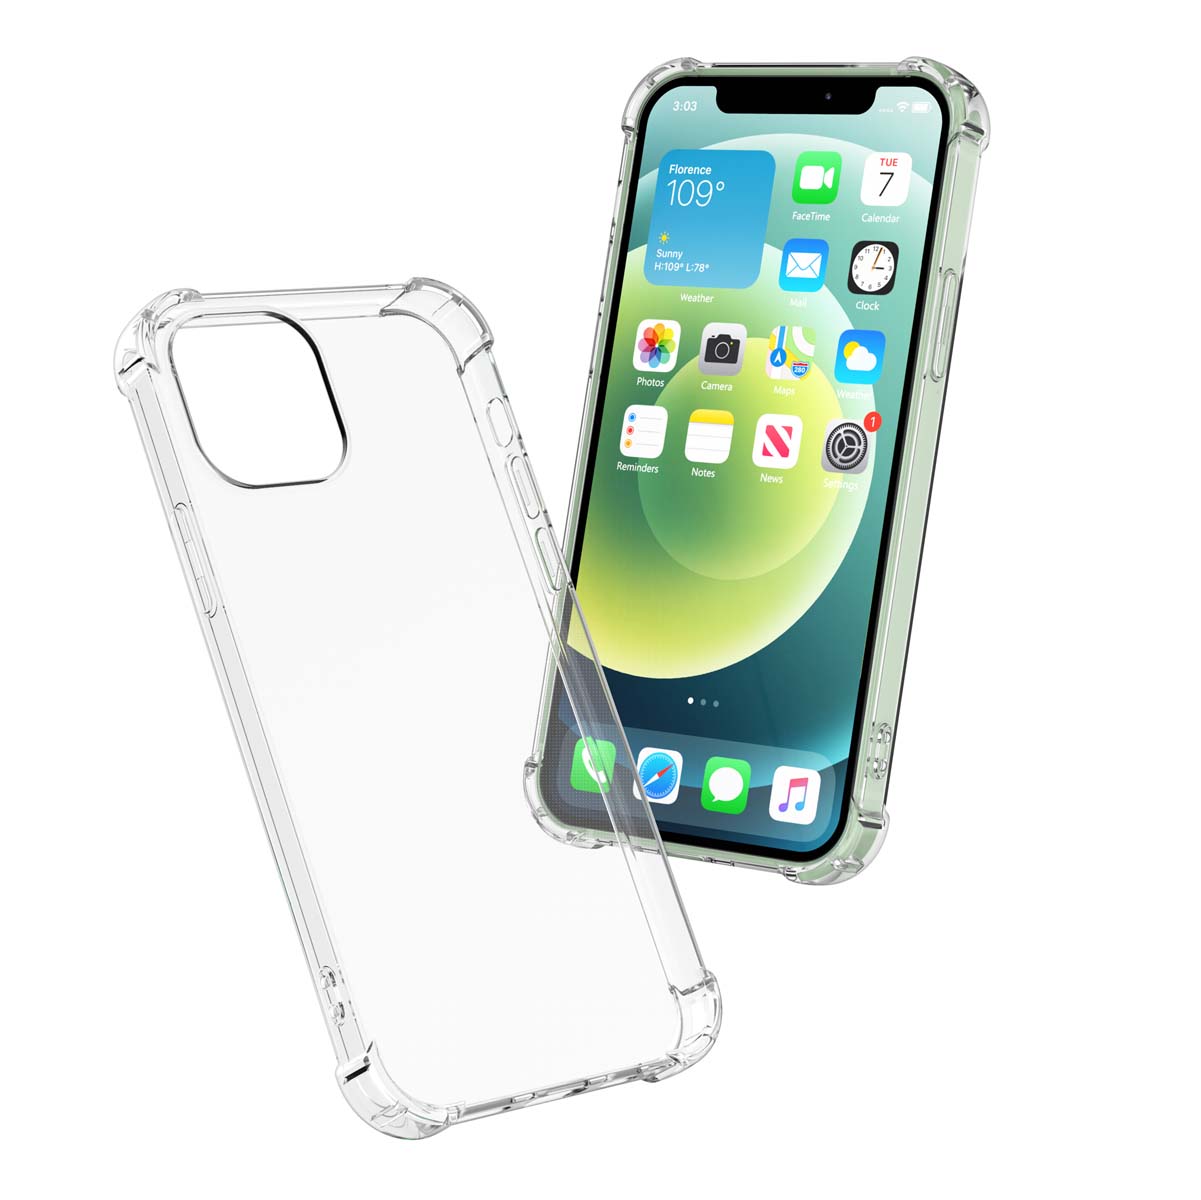 Njjex iPhone 11 / iPhone XR / iPhone 12 Pro Max Case, Njjex iPhone 12 Crystal Clear Shock Absorption Technology Bumper Soft TPU Cover Case For Apple iPhone 11, 12 Mini, 12 Pro Max - image 1 of 11